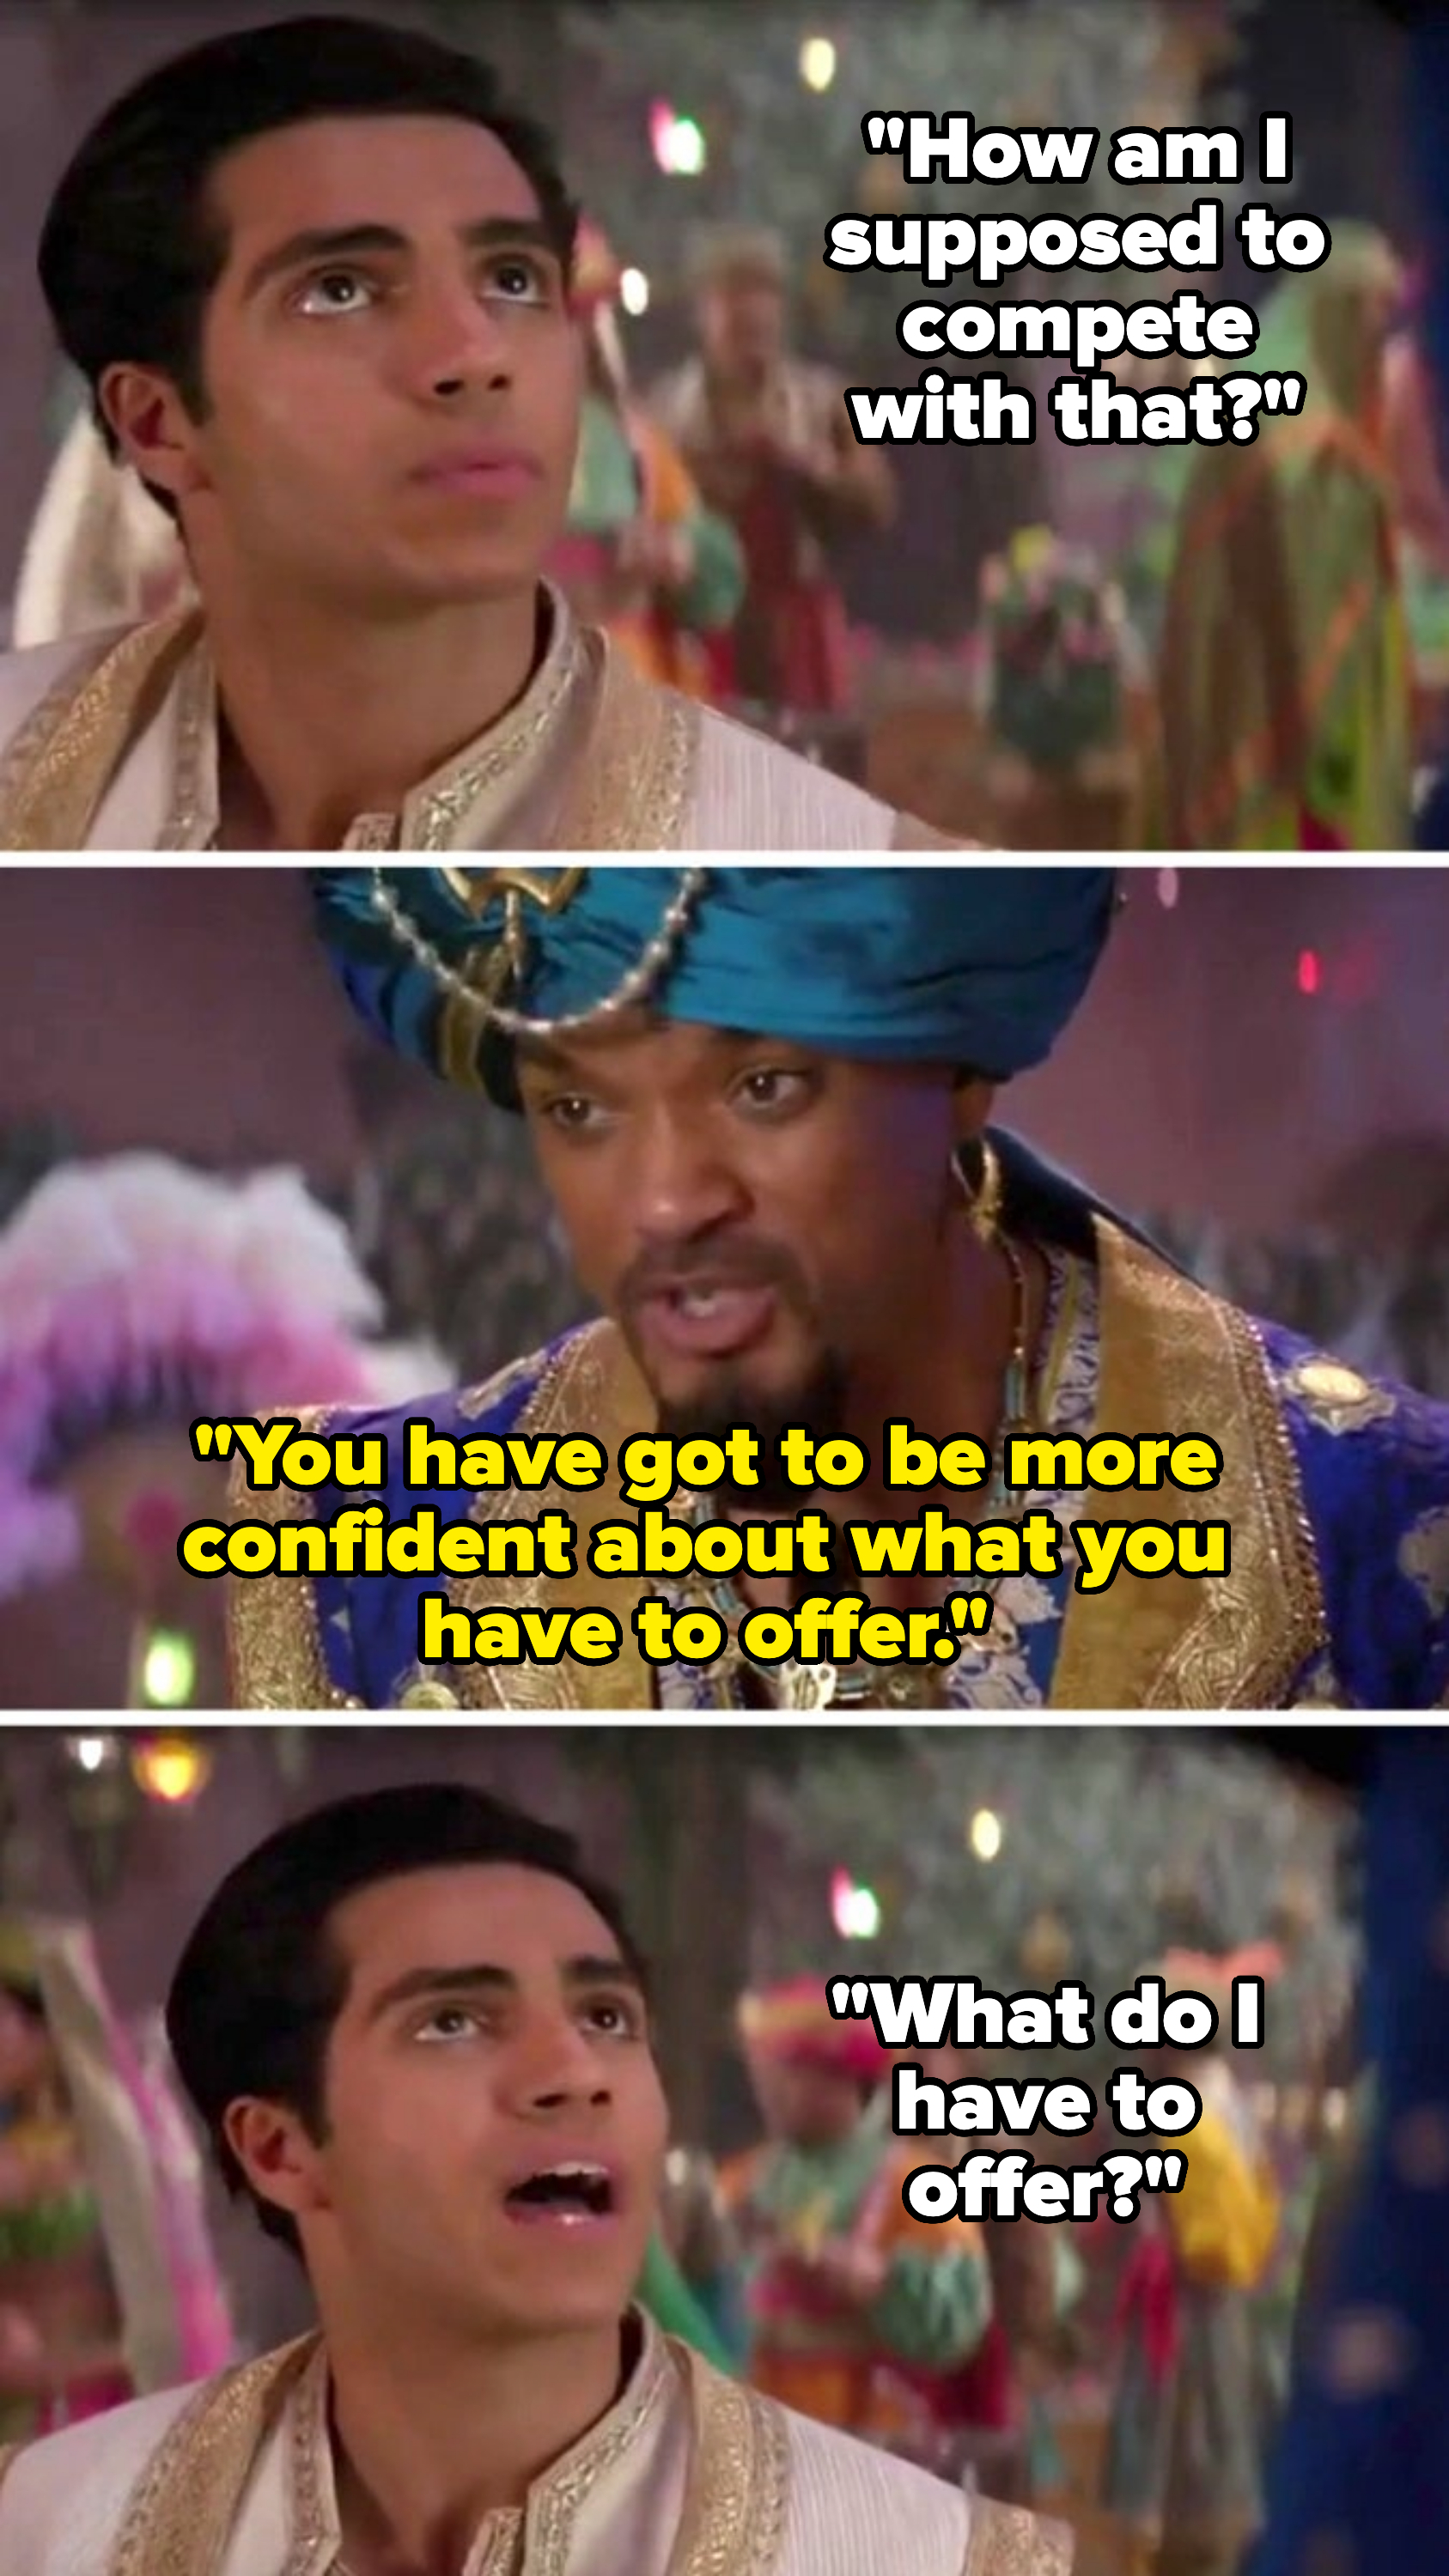 Aladdin and Genie from &quot;Aladdin&quot; with the Genie saying he has to be more confident about what he has to offer, and Aladdin asks, &quot;What do I have to offer?&quot;